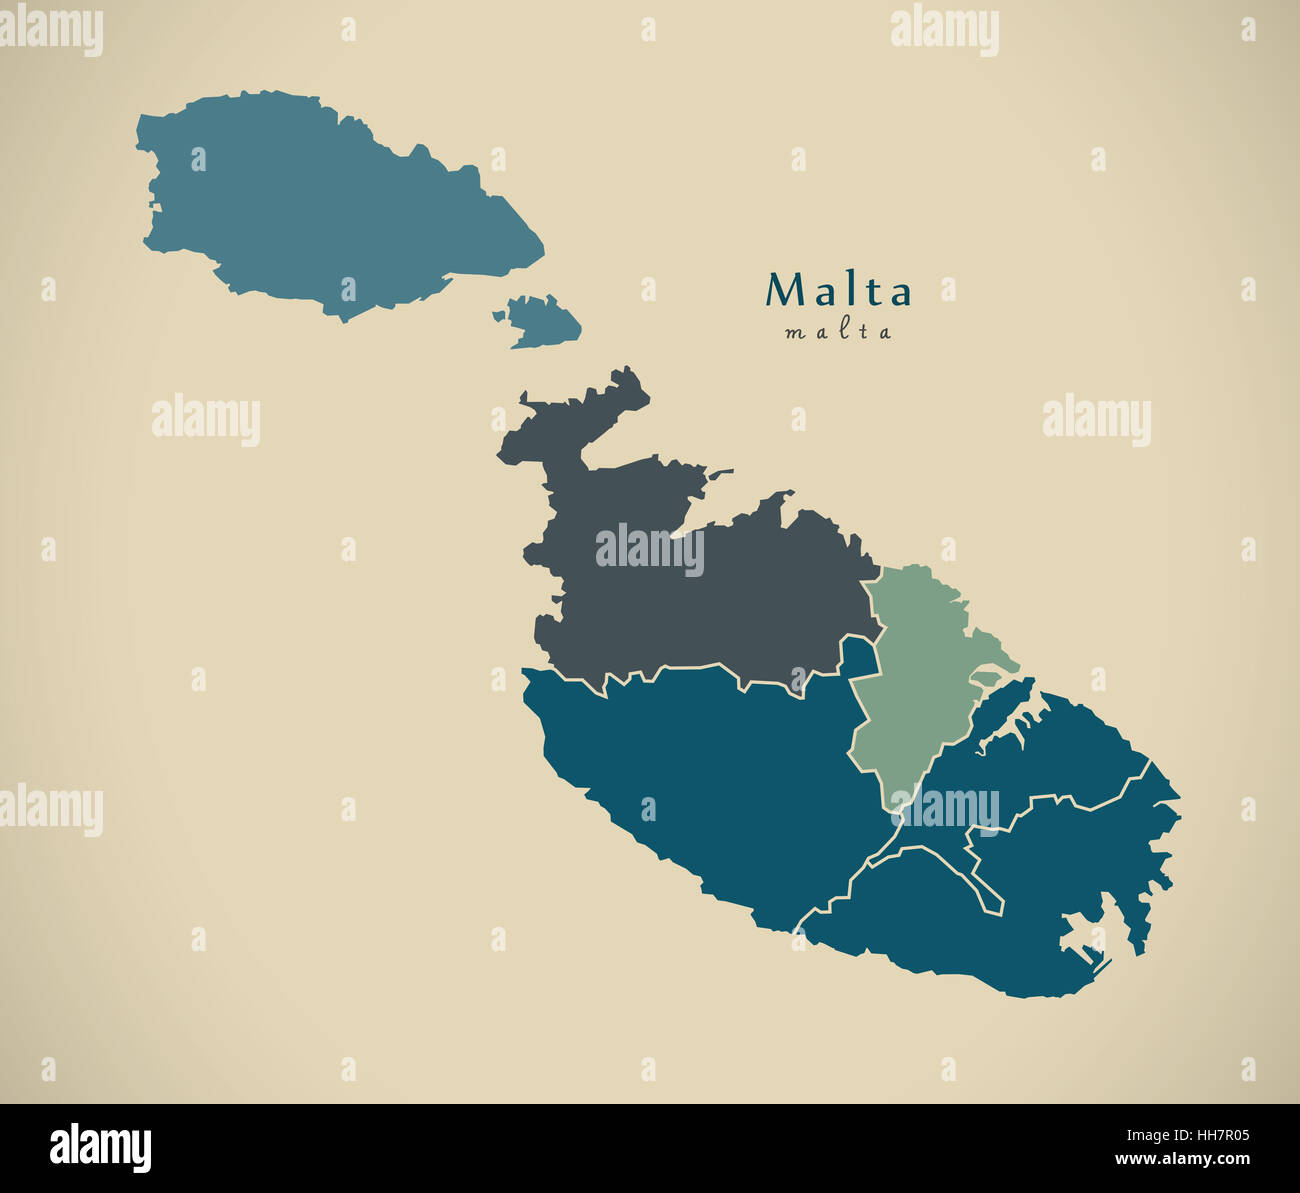 Modern Map - Malta with districts MT illustration Stock Photo